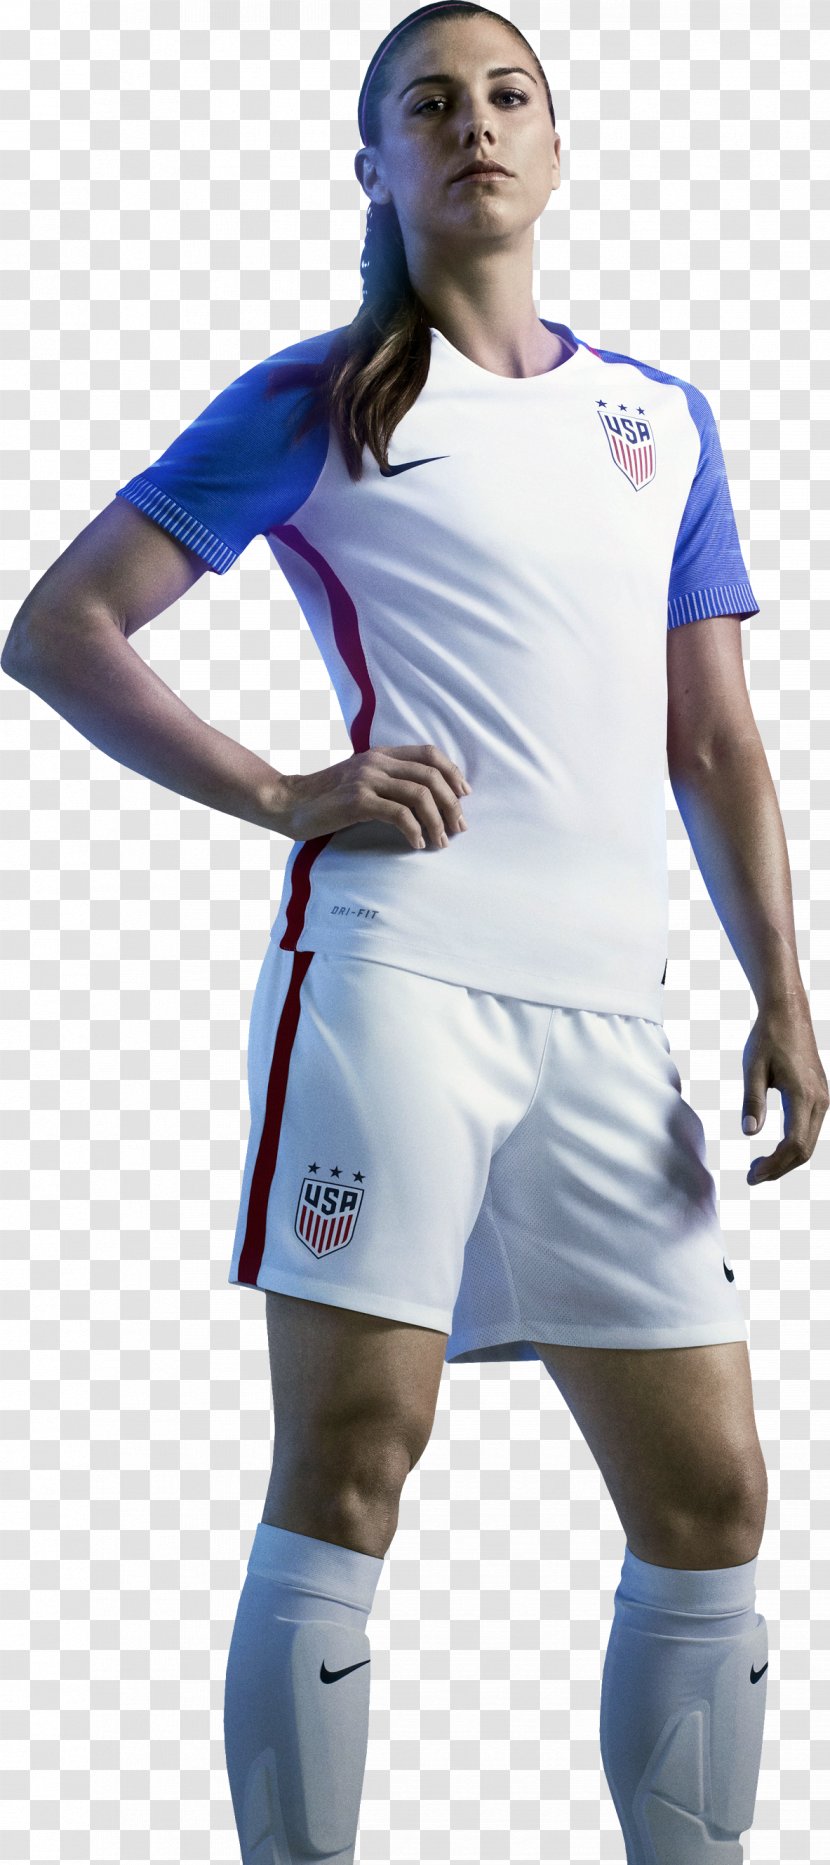 Alex Morgan Jersey United States Women's National Soccer Team Football Player - Neck Transparent PNG